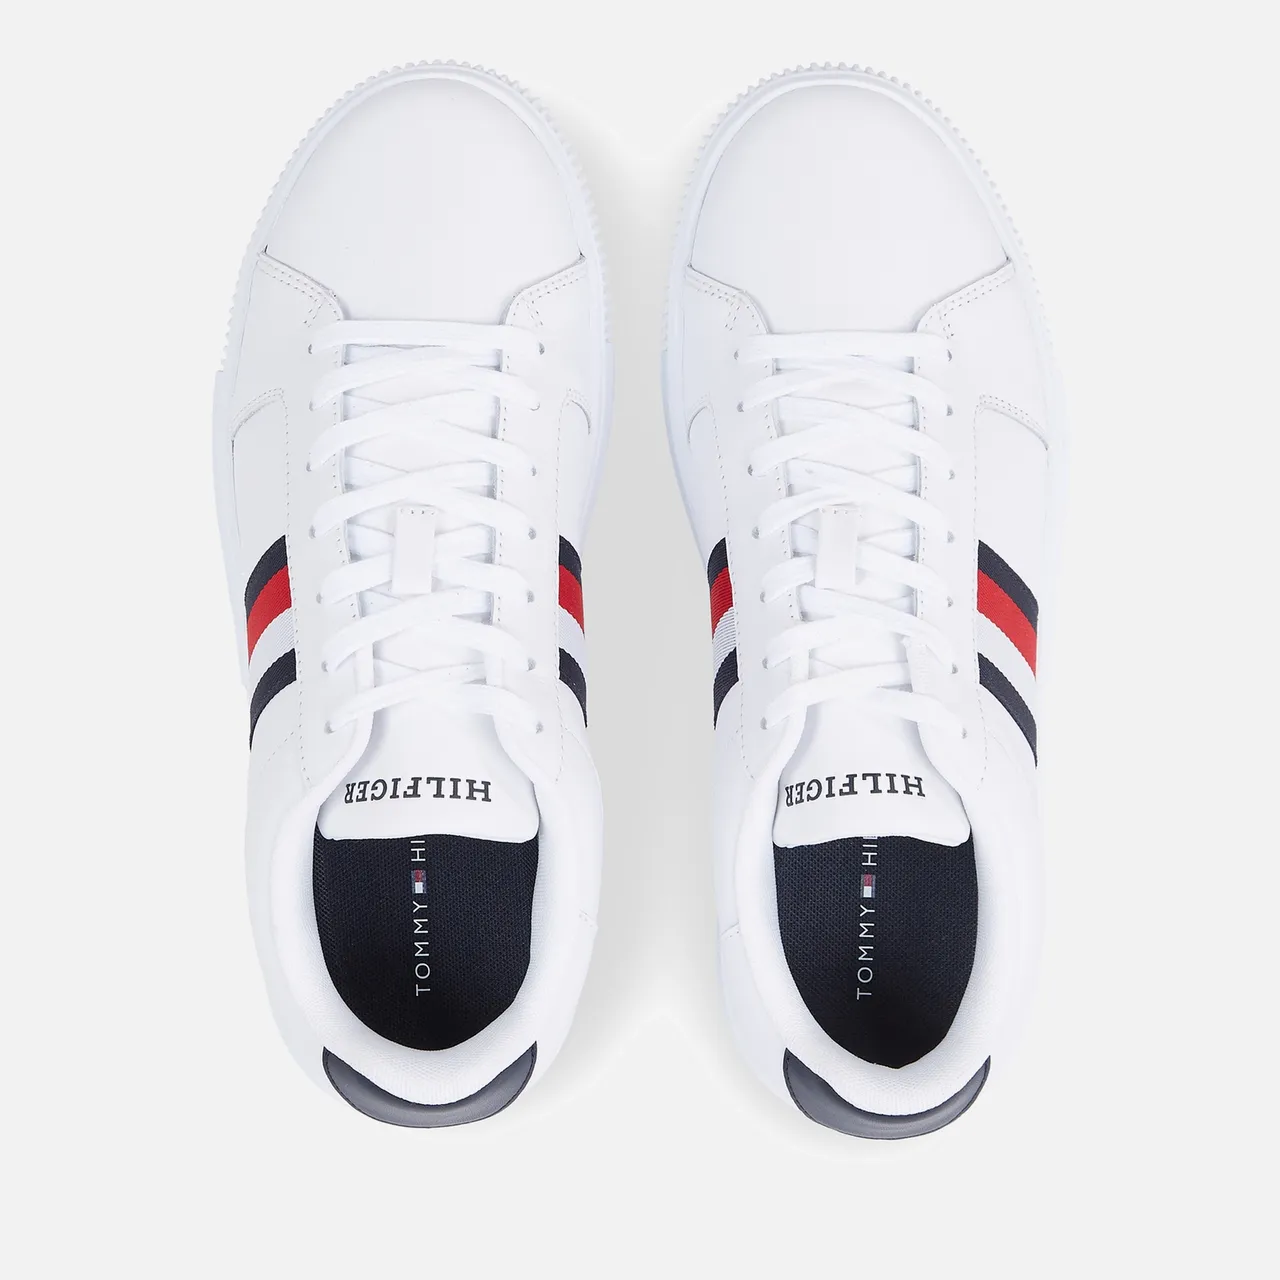 Tommy Hilfiger Men's Leather Cupsole Trainers